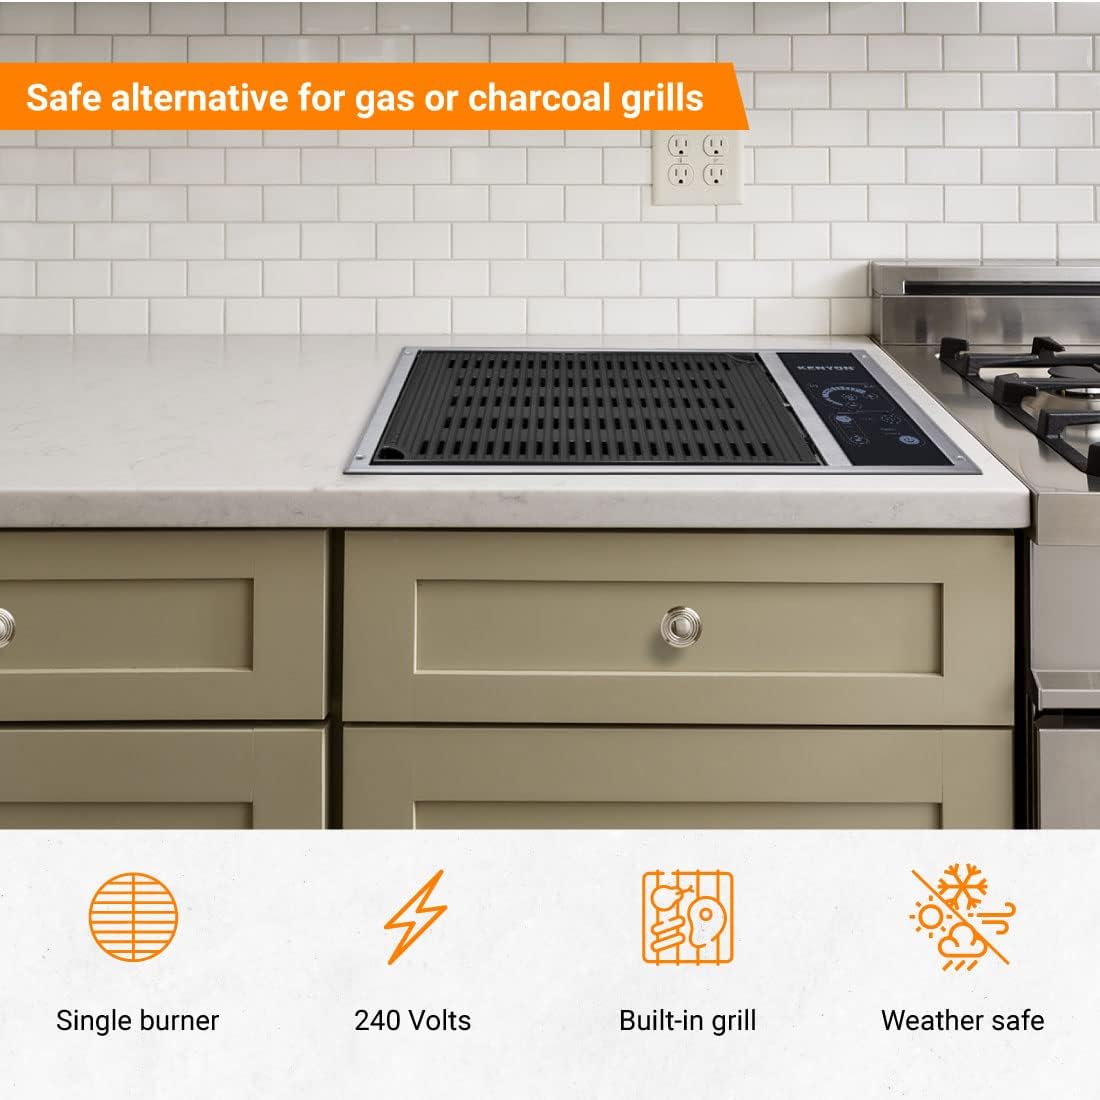 Kenyon No-Lid Built-In Electric Grill, Stainless Steel Grill With Single Burner, Quick Heat Up, Digital Touch Panel, UL-Approved For Indoor And Outdoor Use, Dishwasher Safe Grate, 120V - Kenyon No-Lid Electric Grill Review